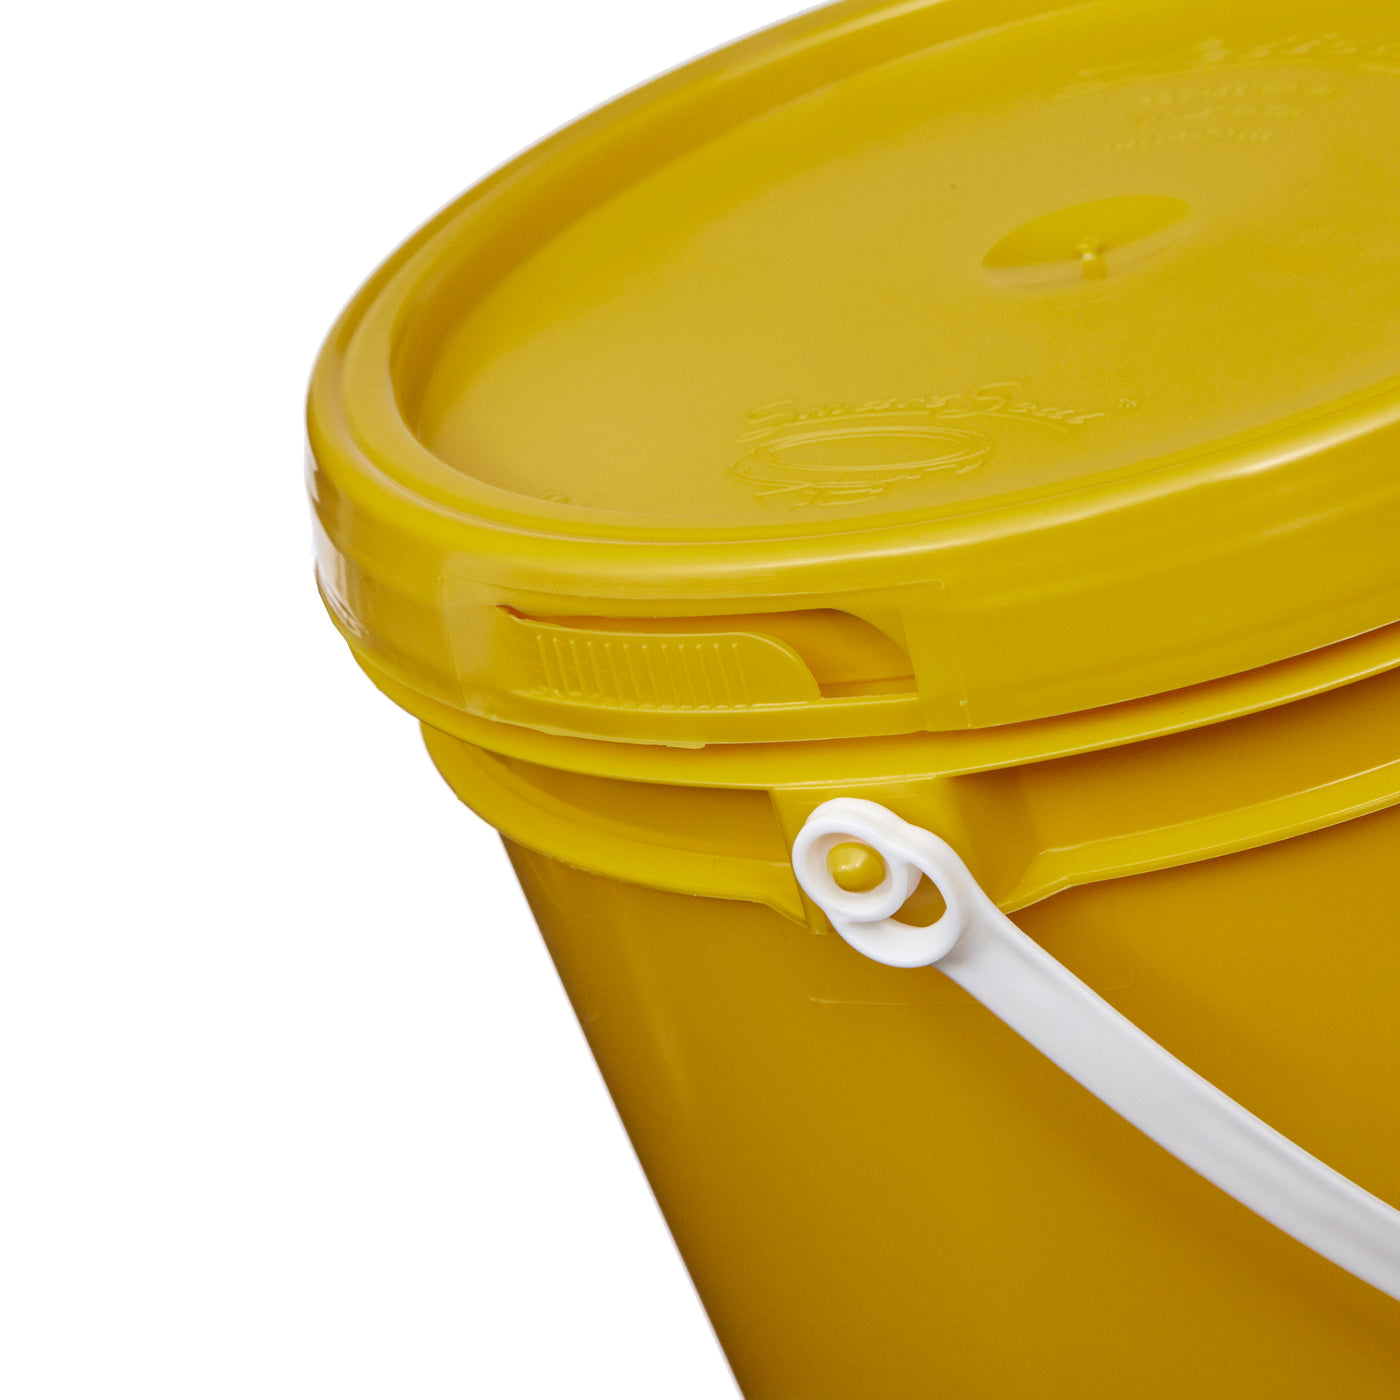 1 Gallon Pails - Plastic Handle # Lid Only, Yellow